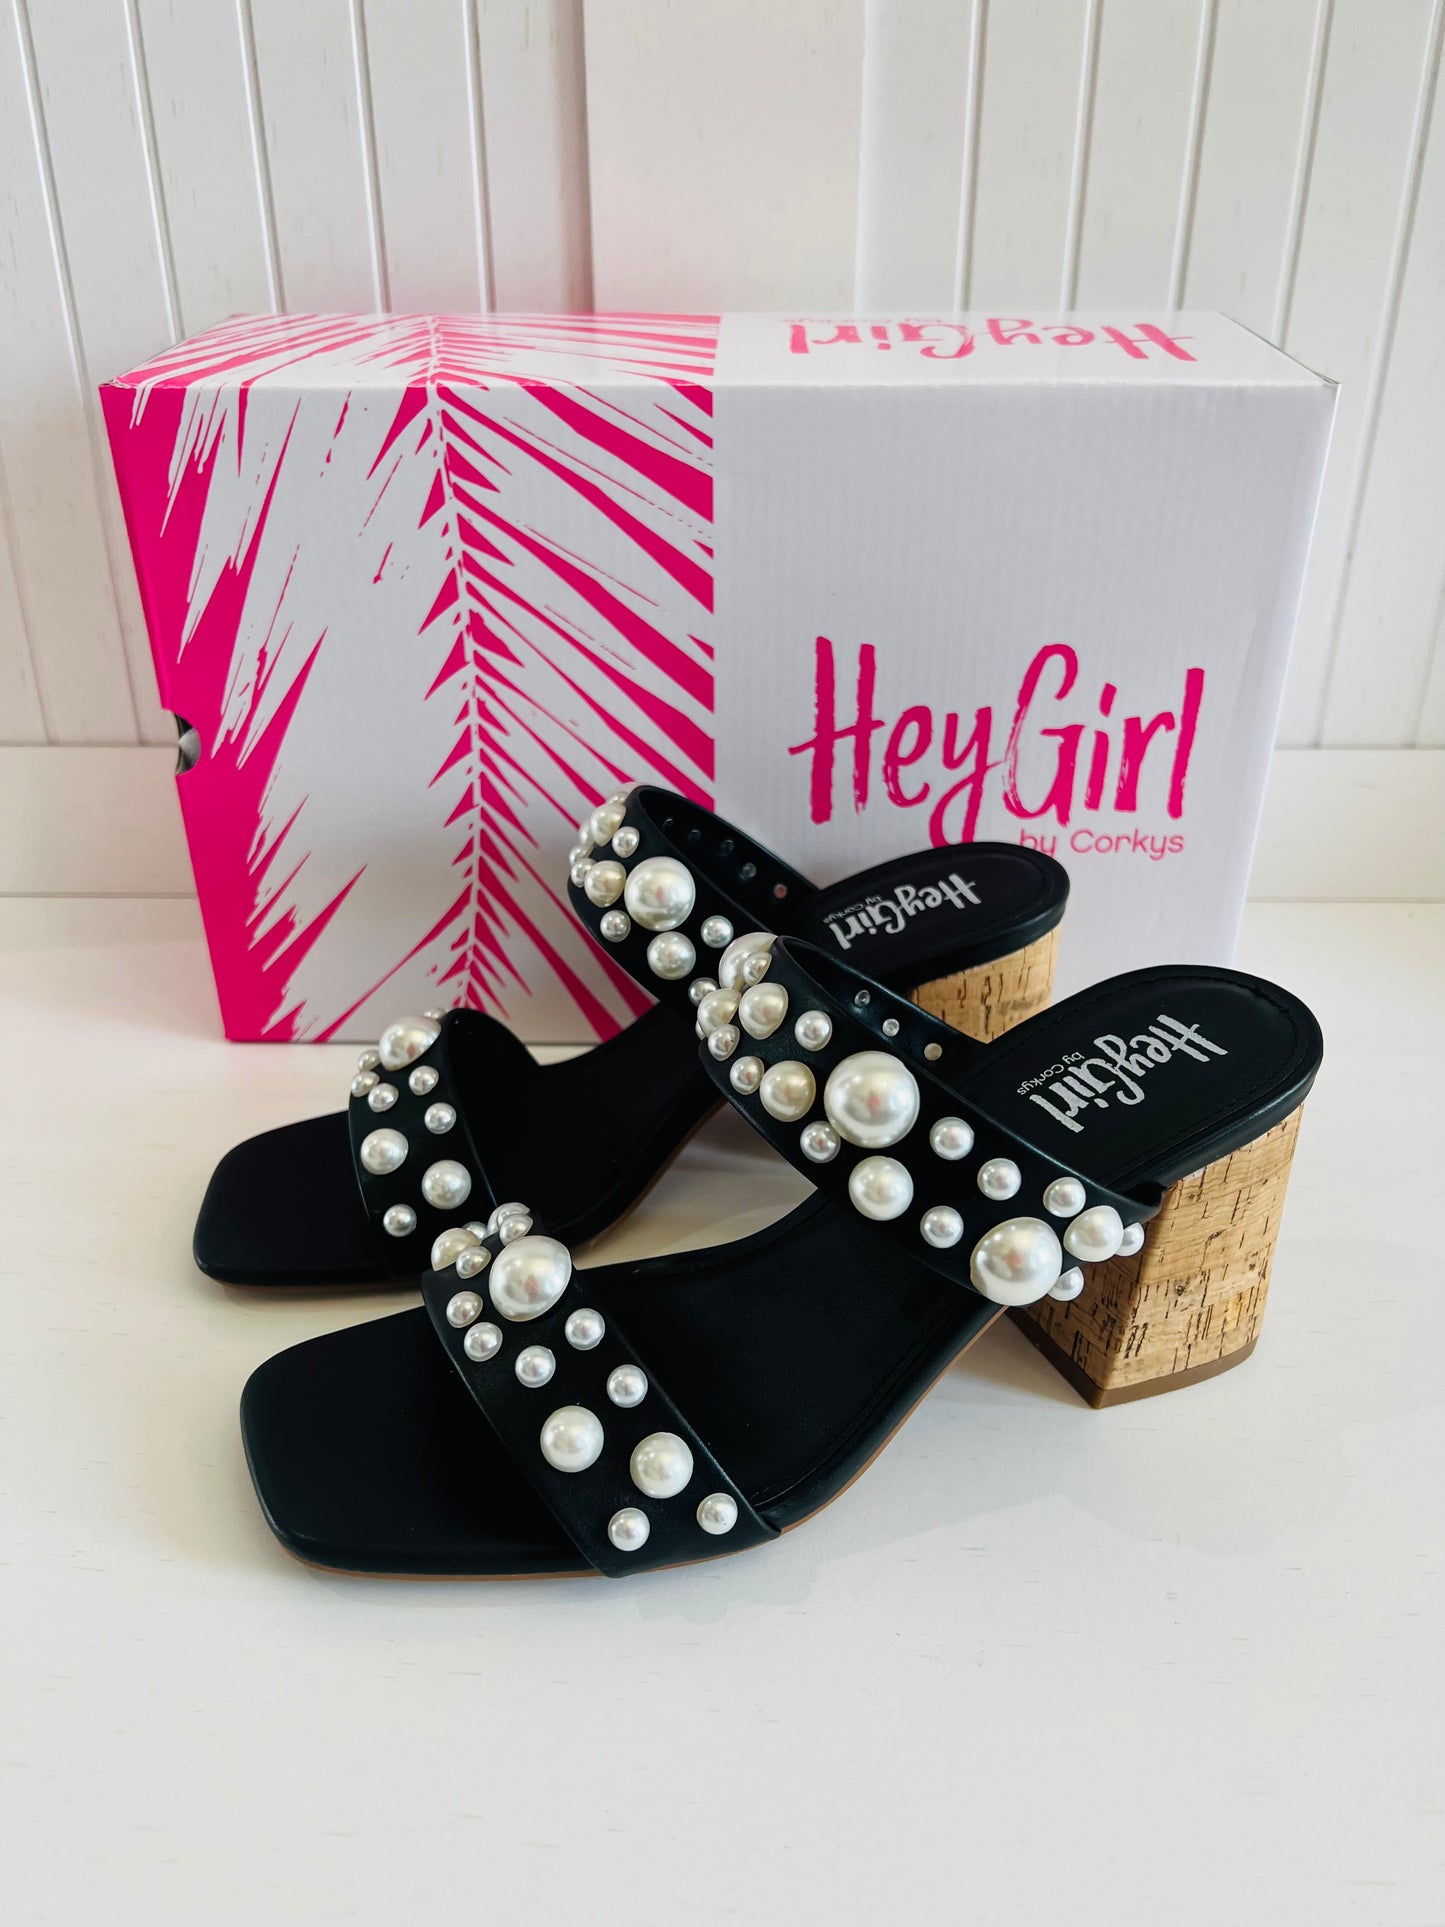 Divine Hey Girl Sandals by Corkys